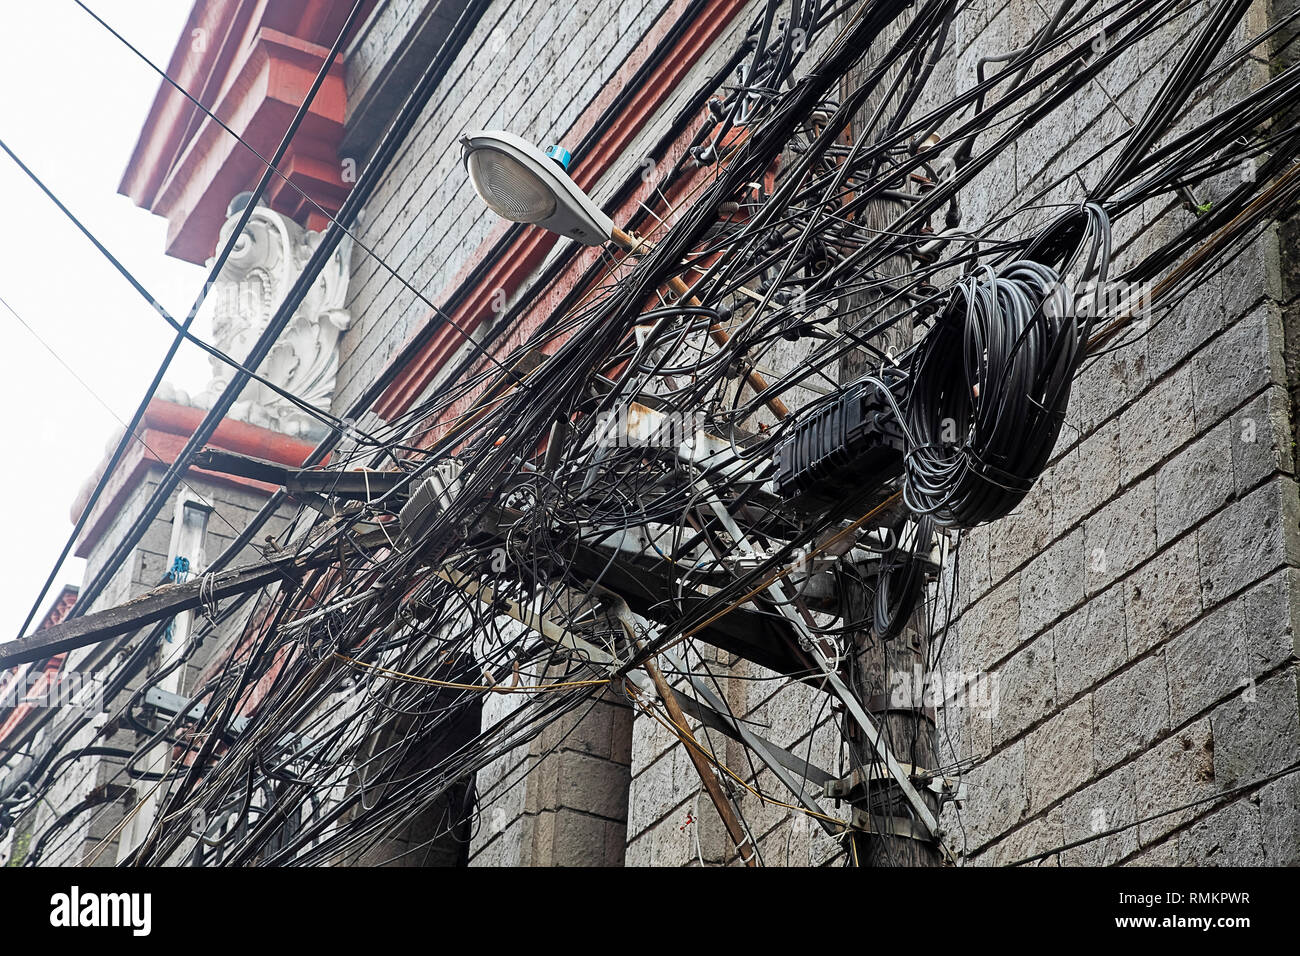 Massive Tangle of cables and wires in the Chinatown area of the city of Manila, Philippines Stock Photo